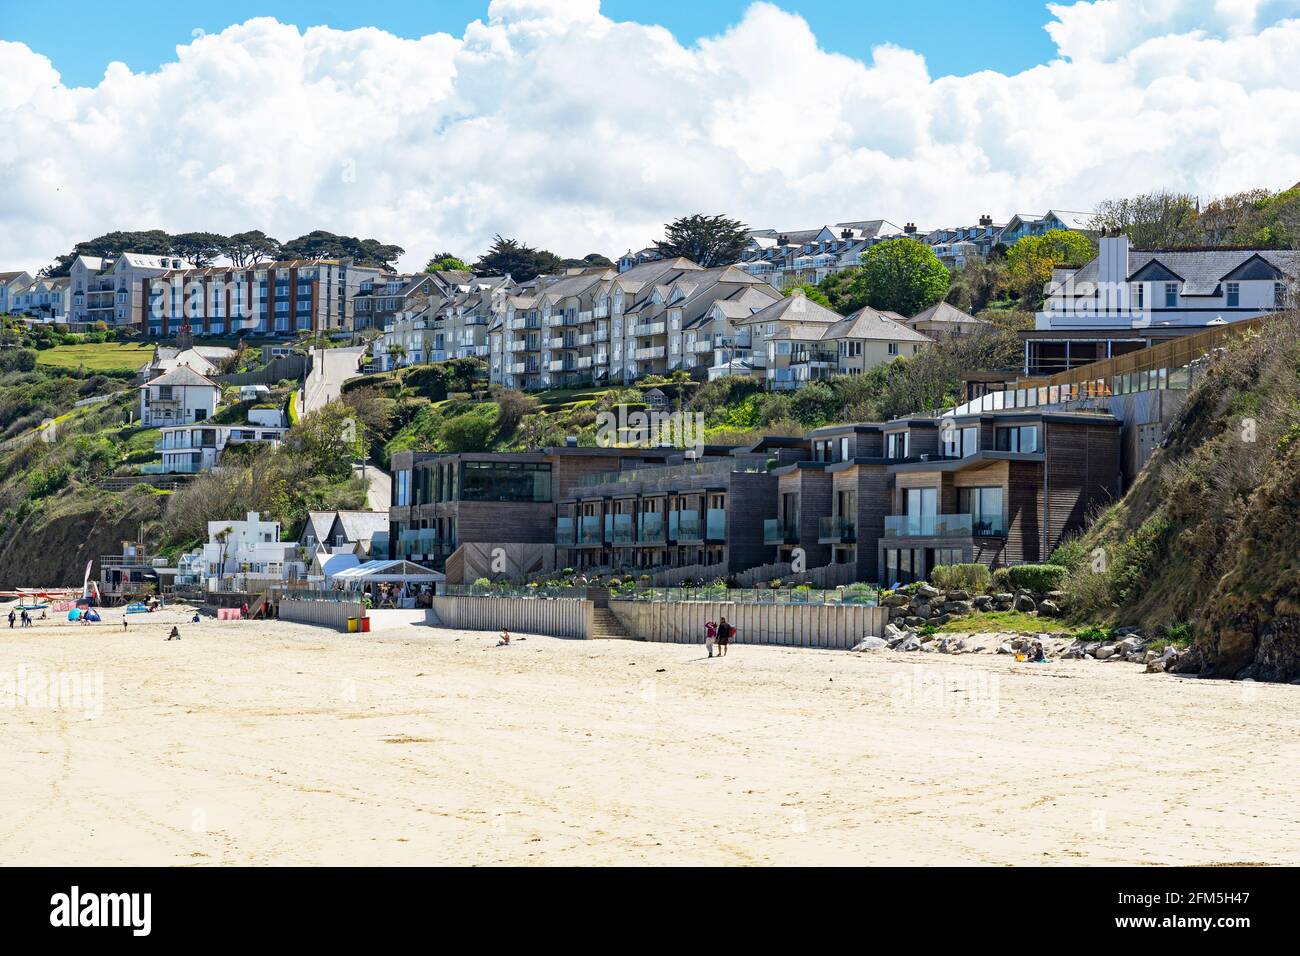 Homes and apartments overlooking the beach at carbis bay near st ives in cornwall, england, uk, The G7 summit will be held here in june 2021 Stock Photo